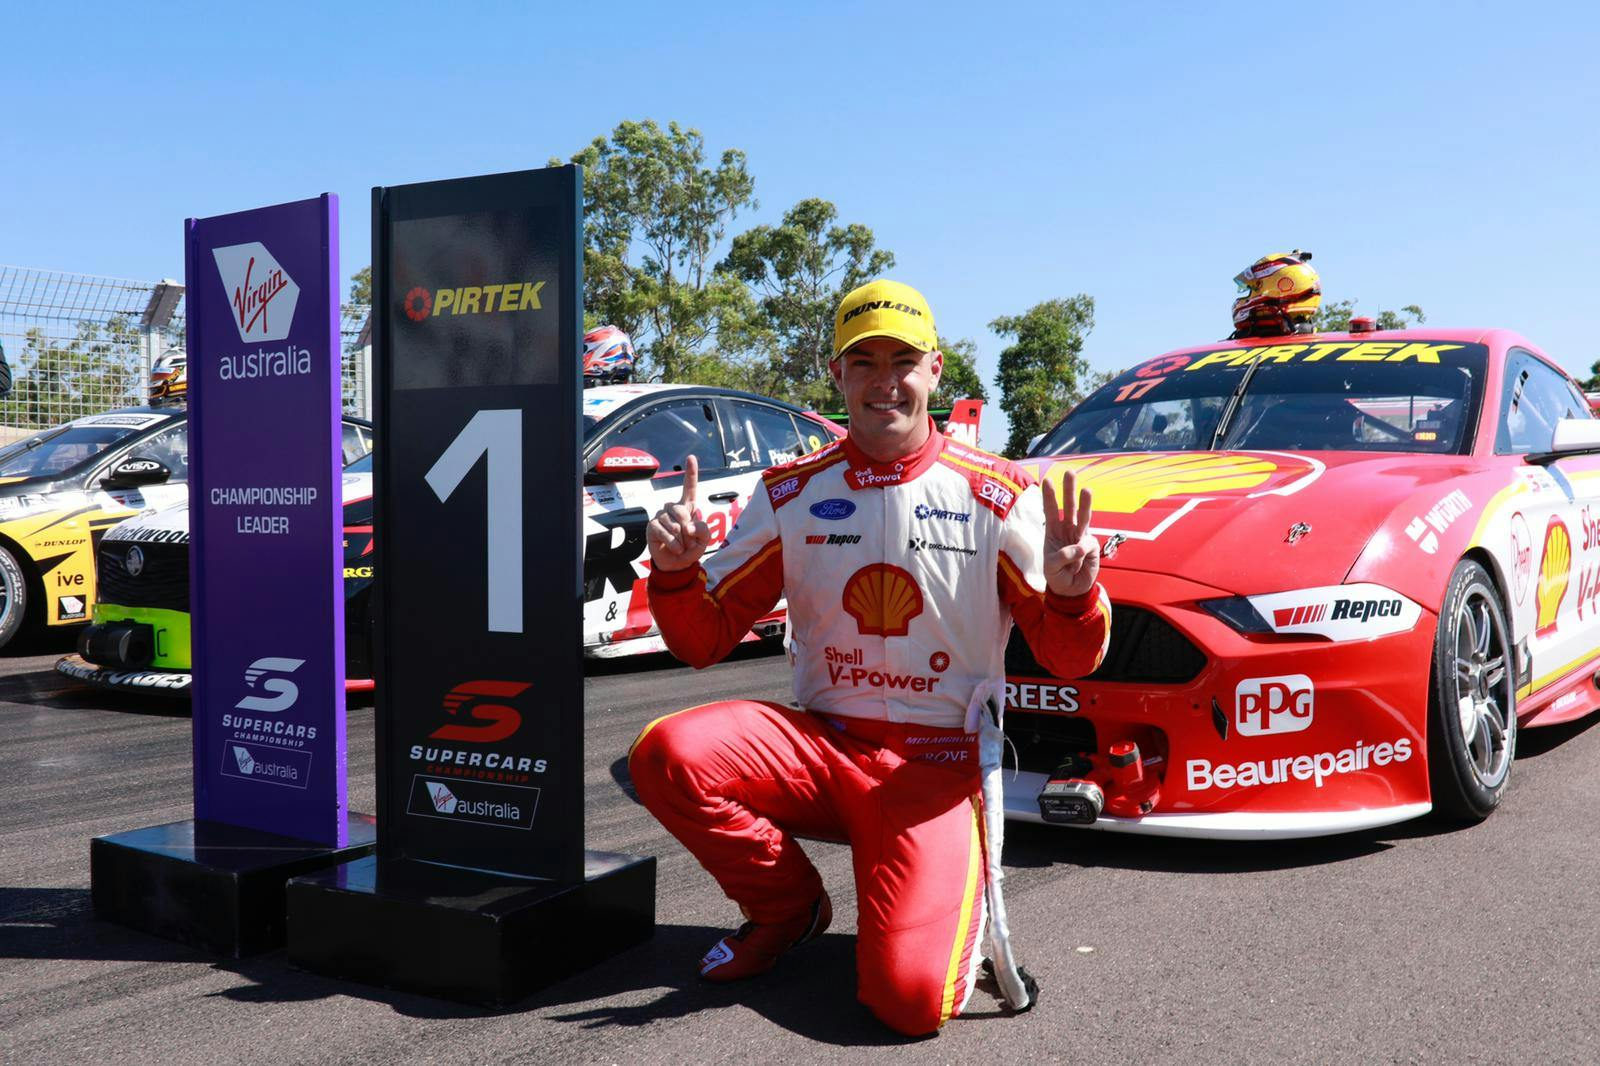 Supercar Driver posing next to signage